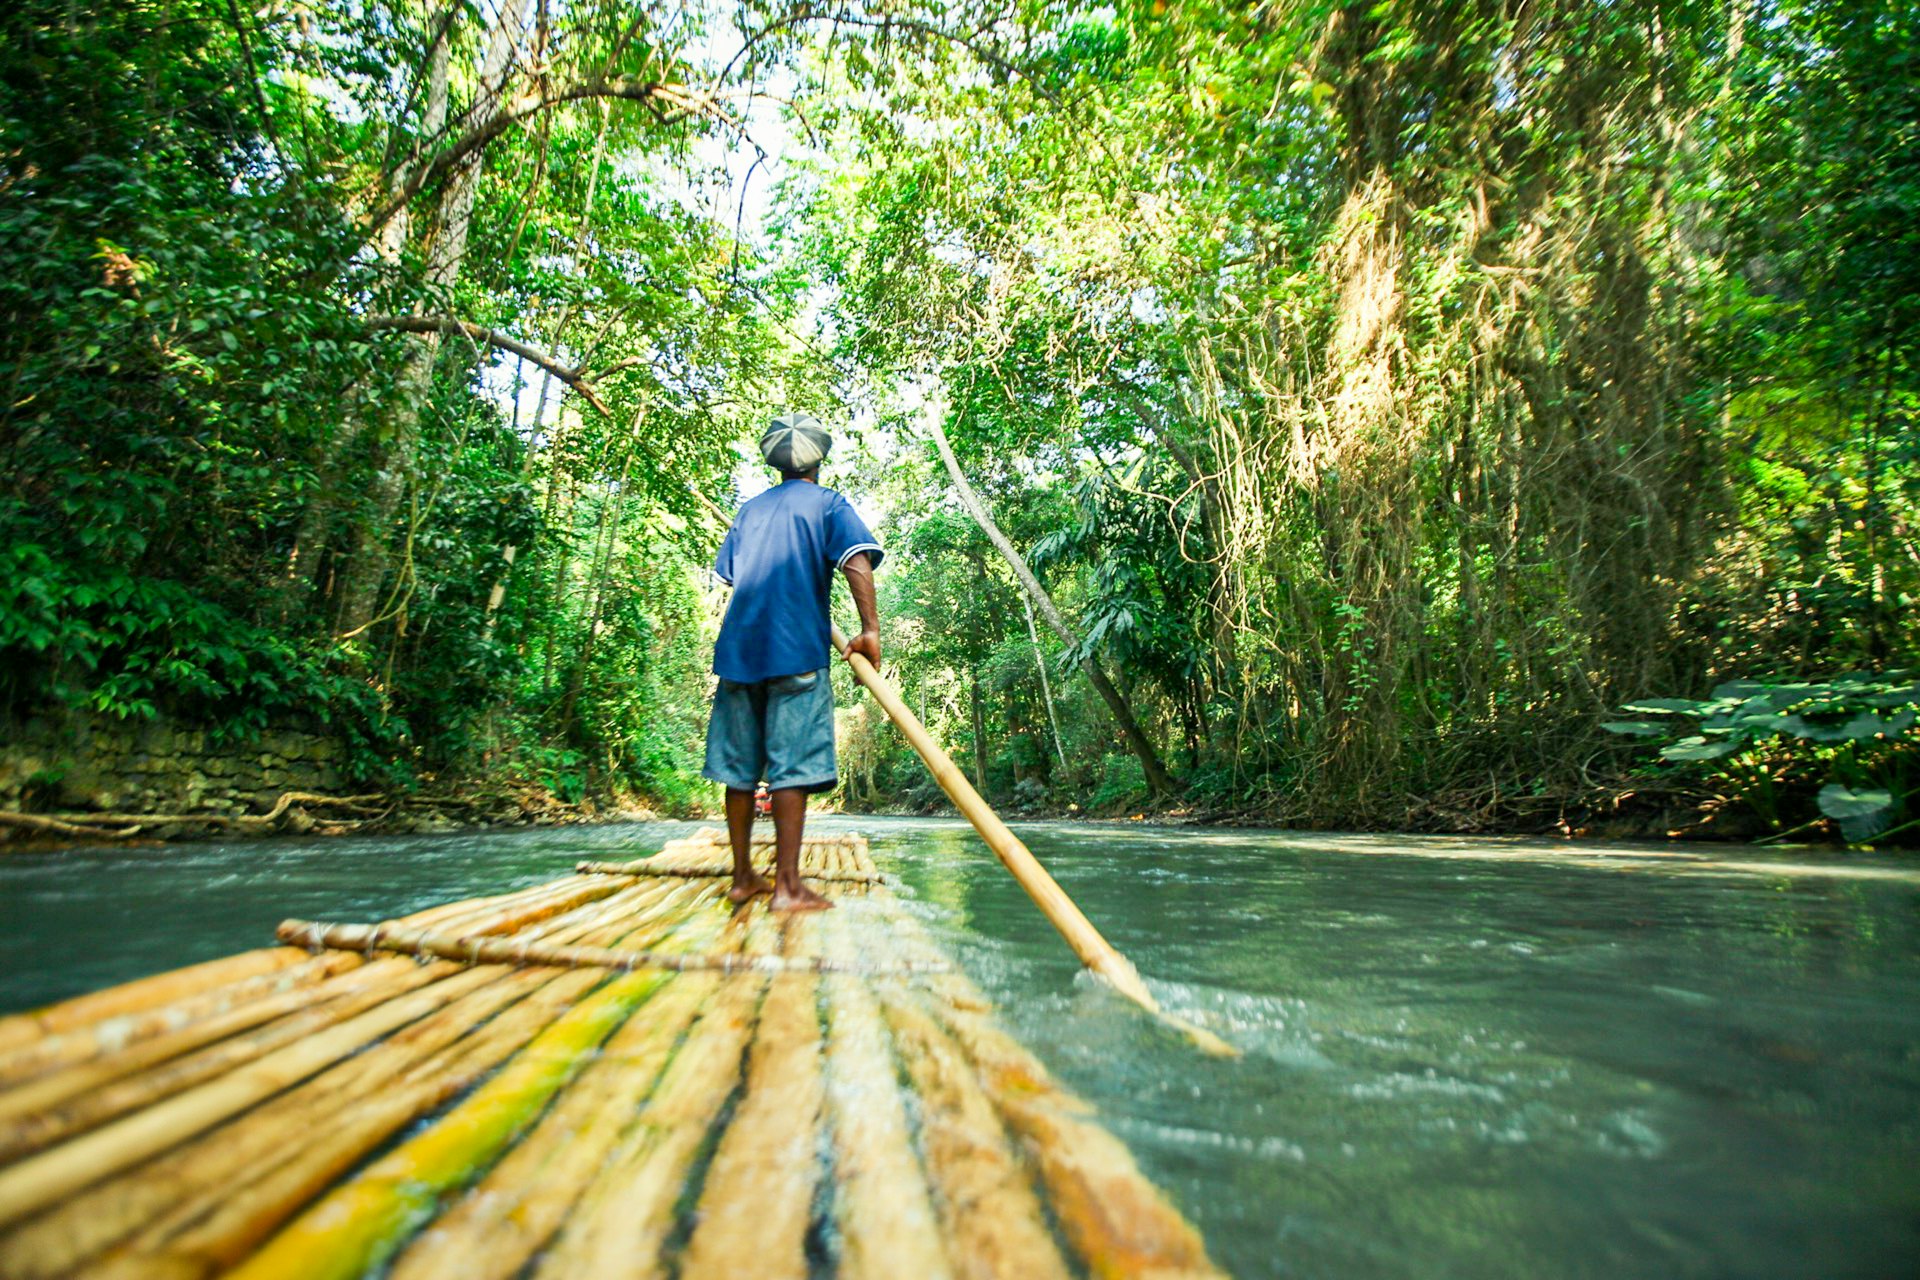 A man river rafting in the forest of Jamaica